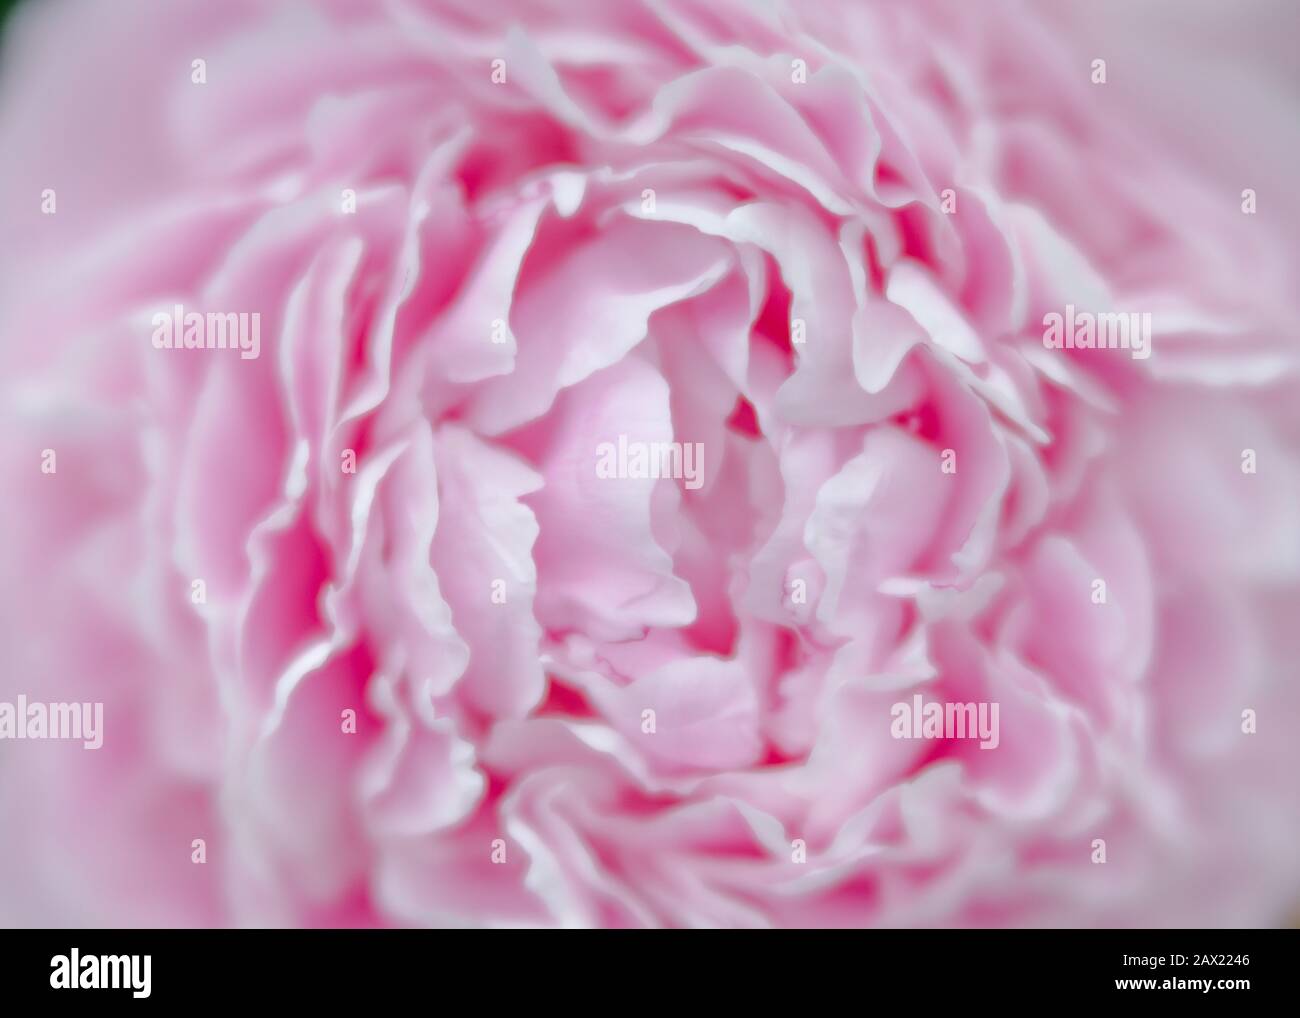 Peony photographed with specialty lens to produce soft creamy bokeh and a shallow depth of field. Stock Photo